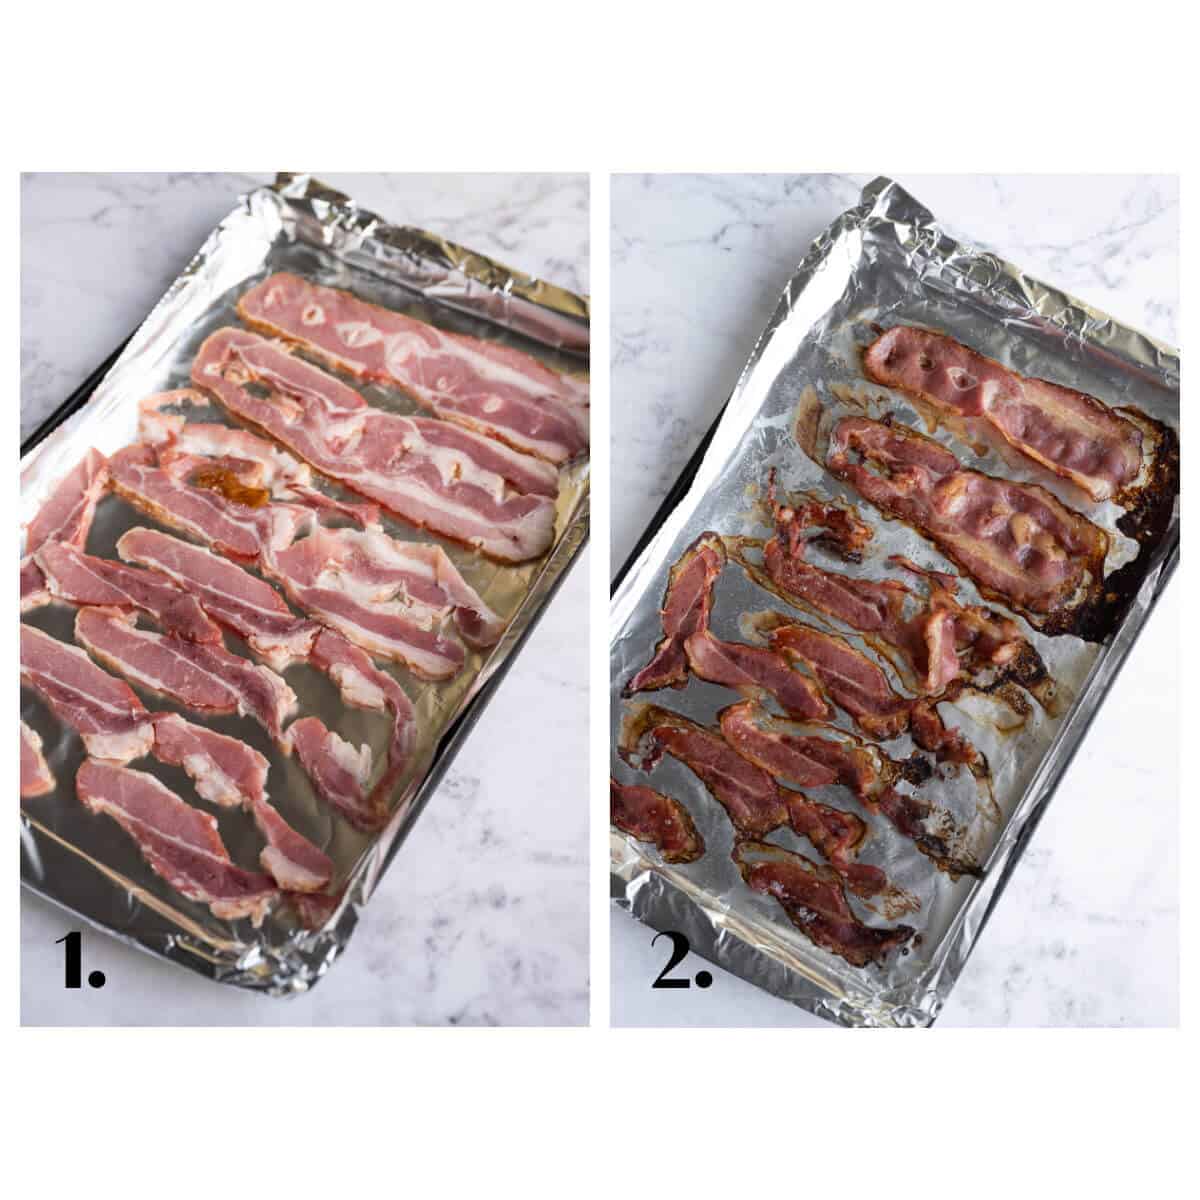 two image collage showing before and after cooking bacon in the oven.